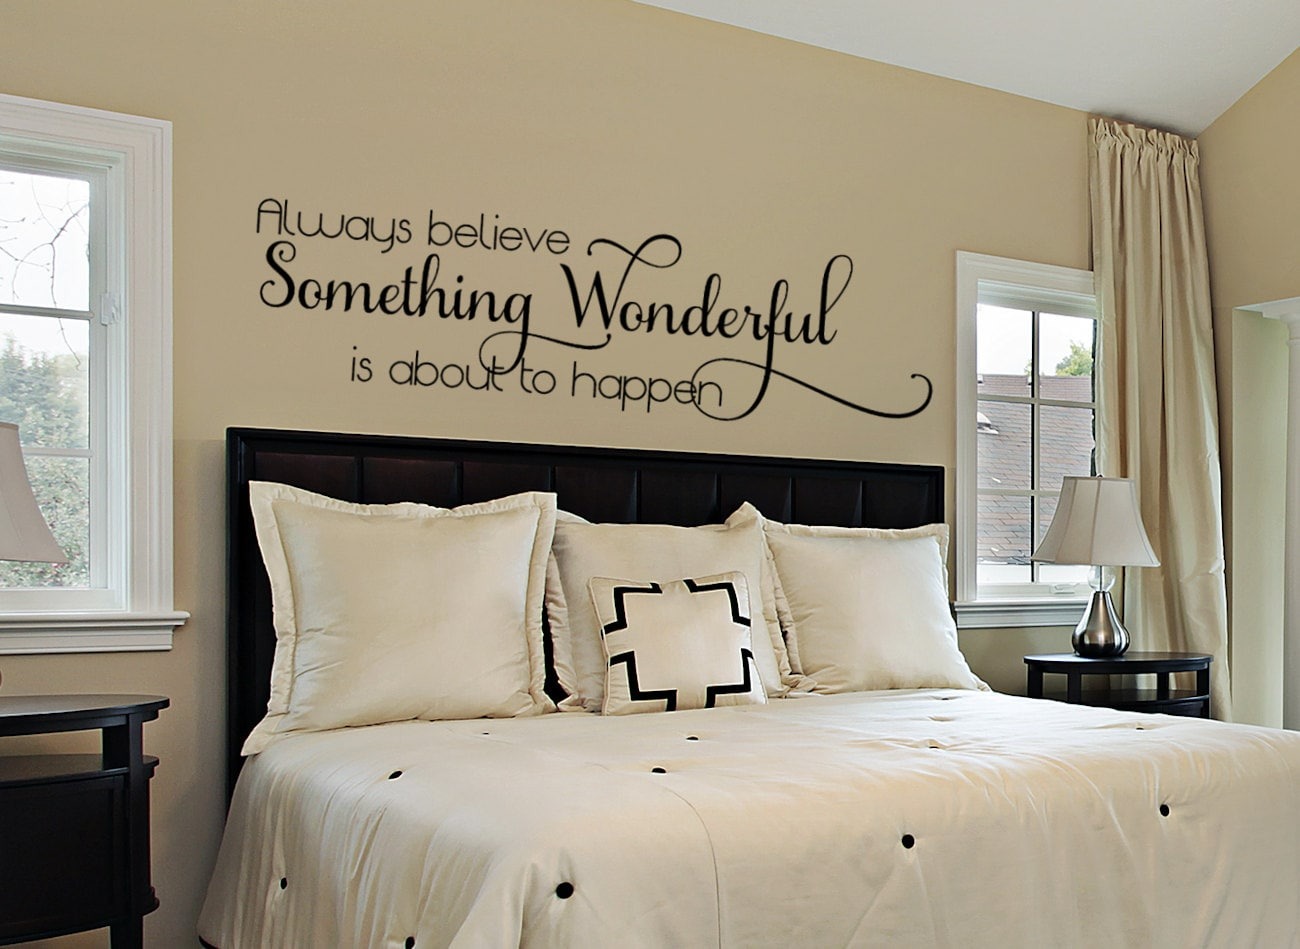 How To Build Wall Decals For The Bedroom